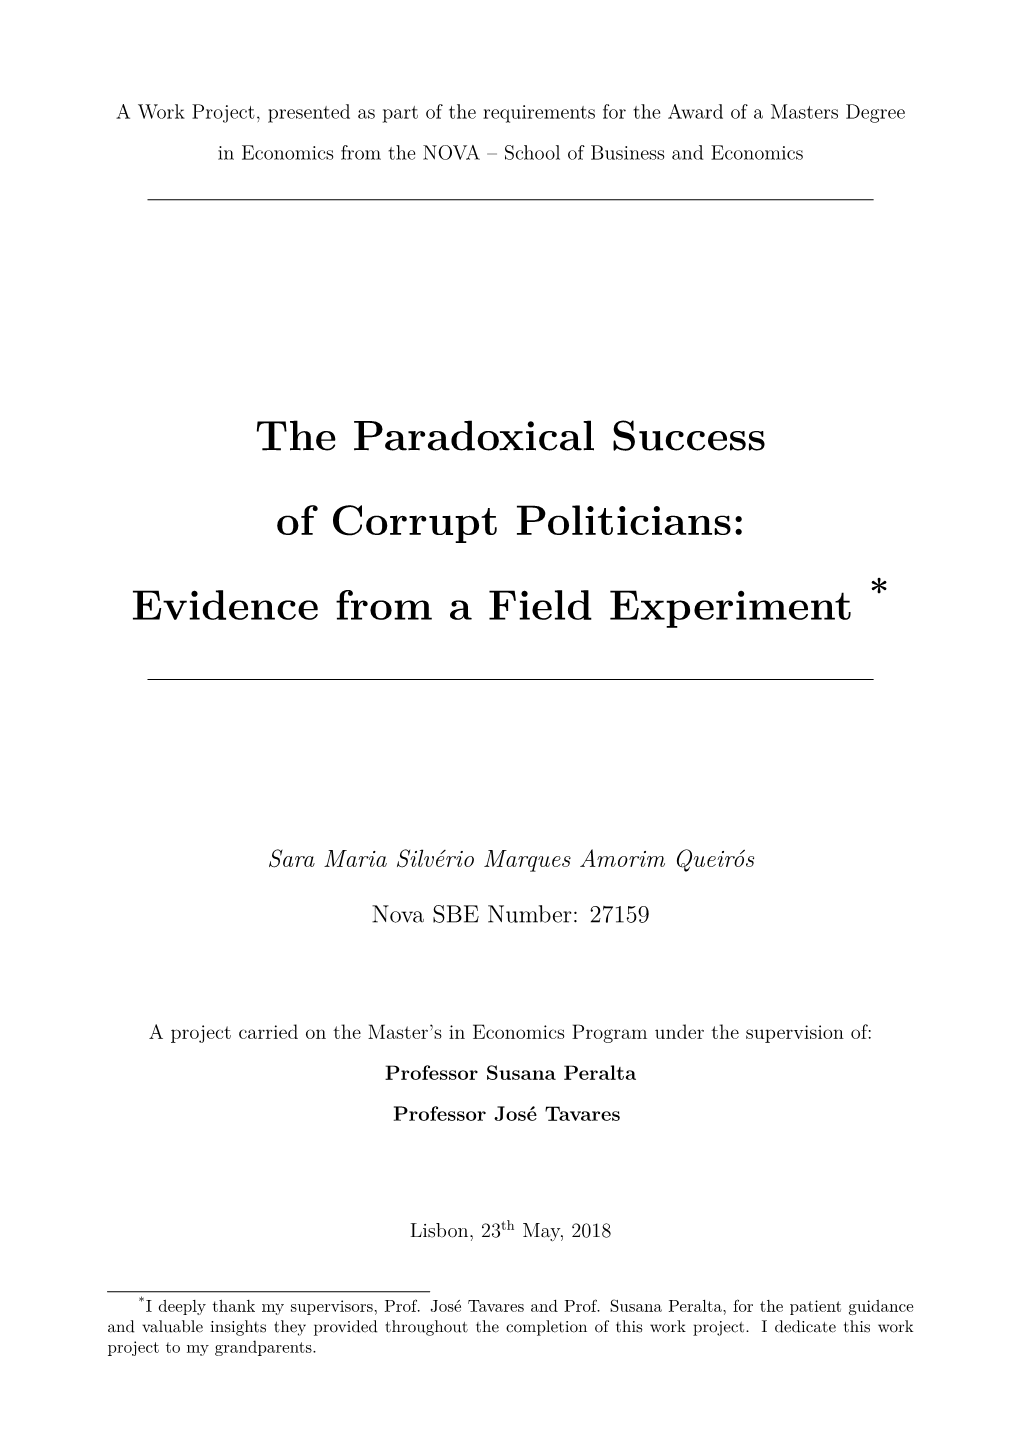 The Paradoxical Success of Corrupt Politicians: Evidence from a Field Experiment *